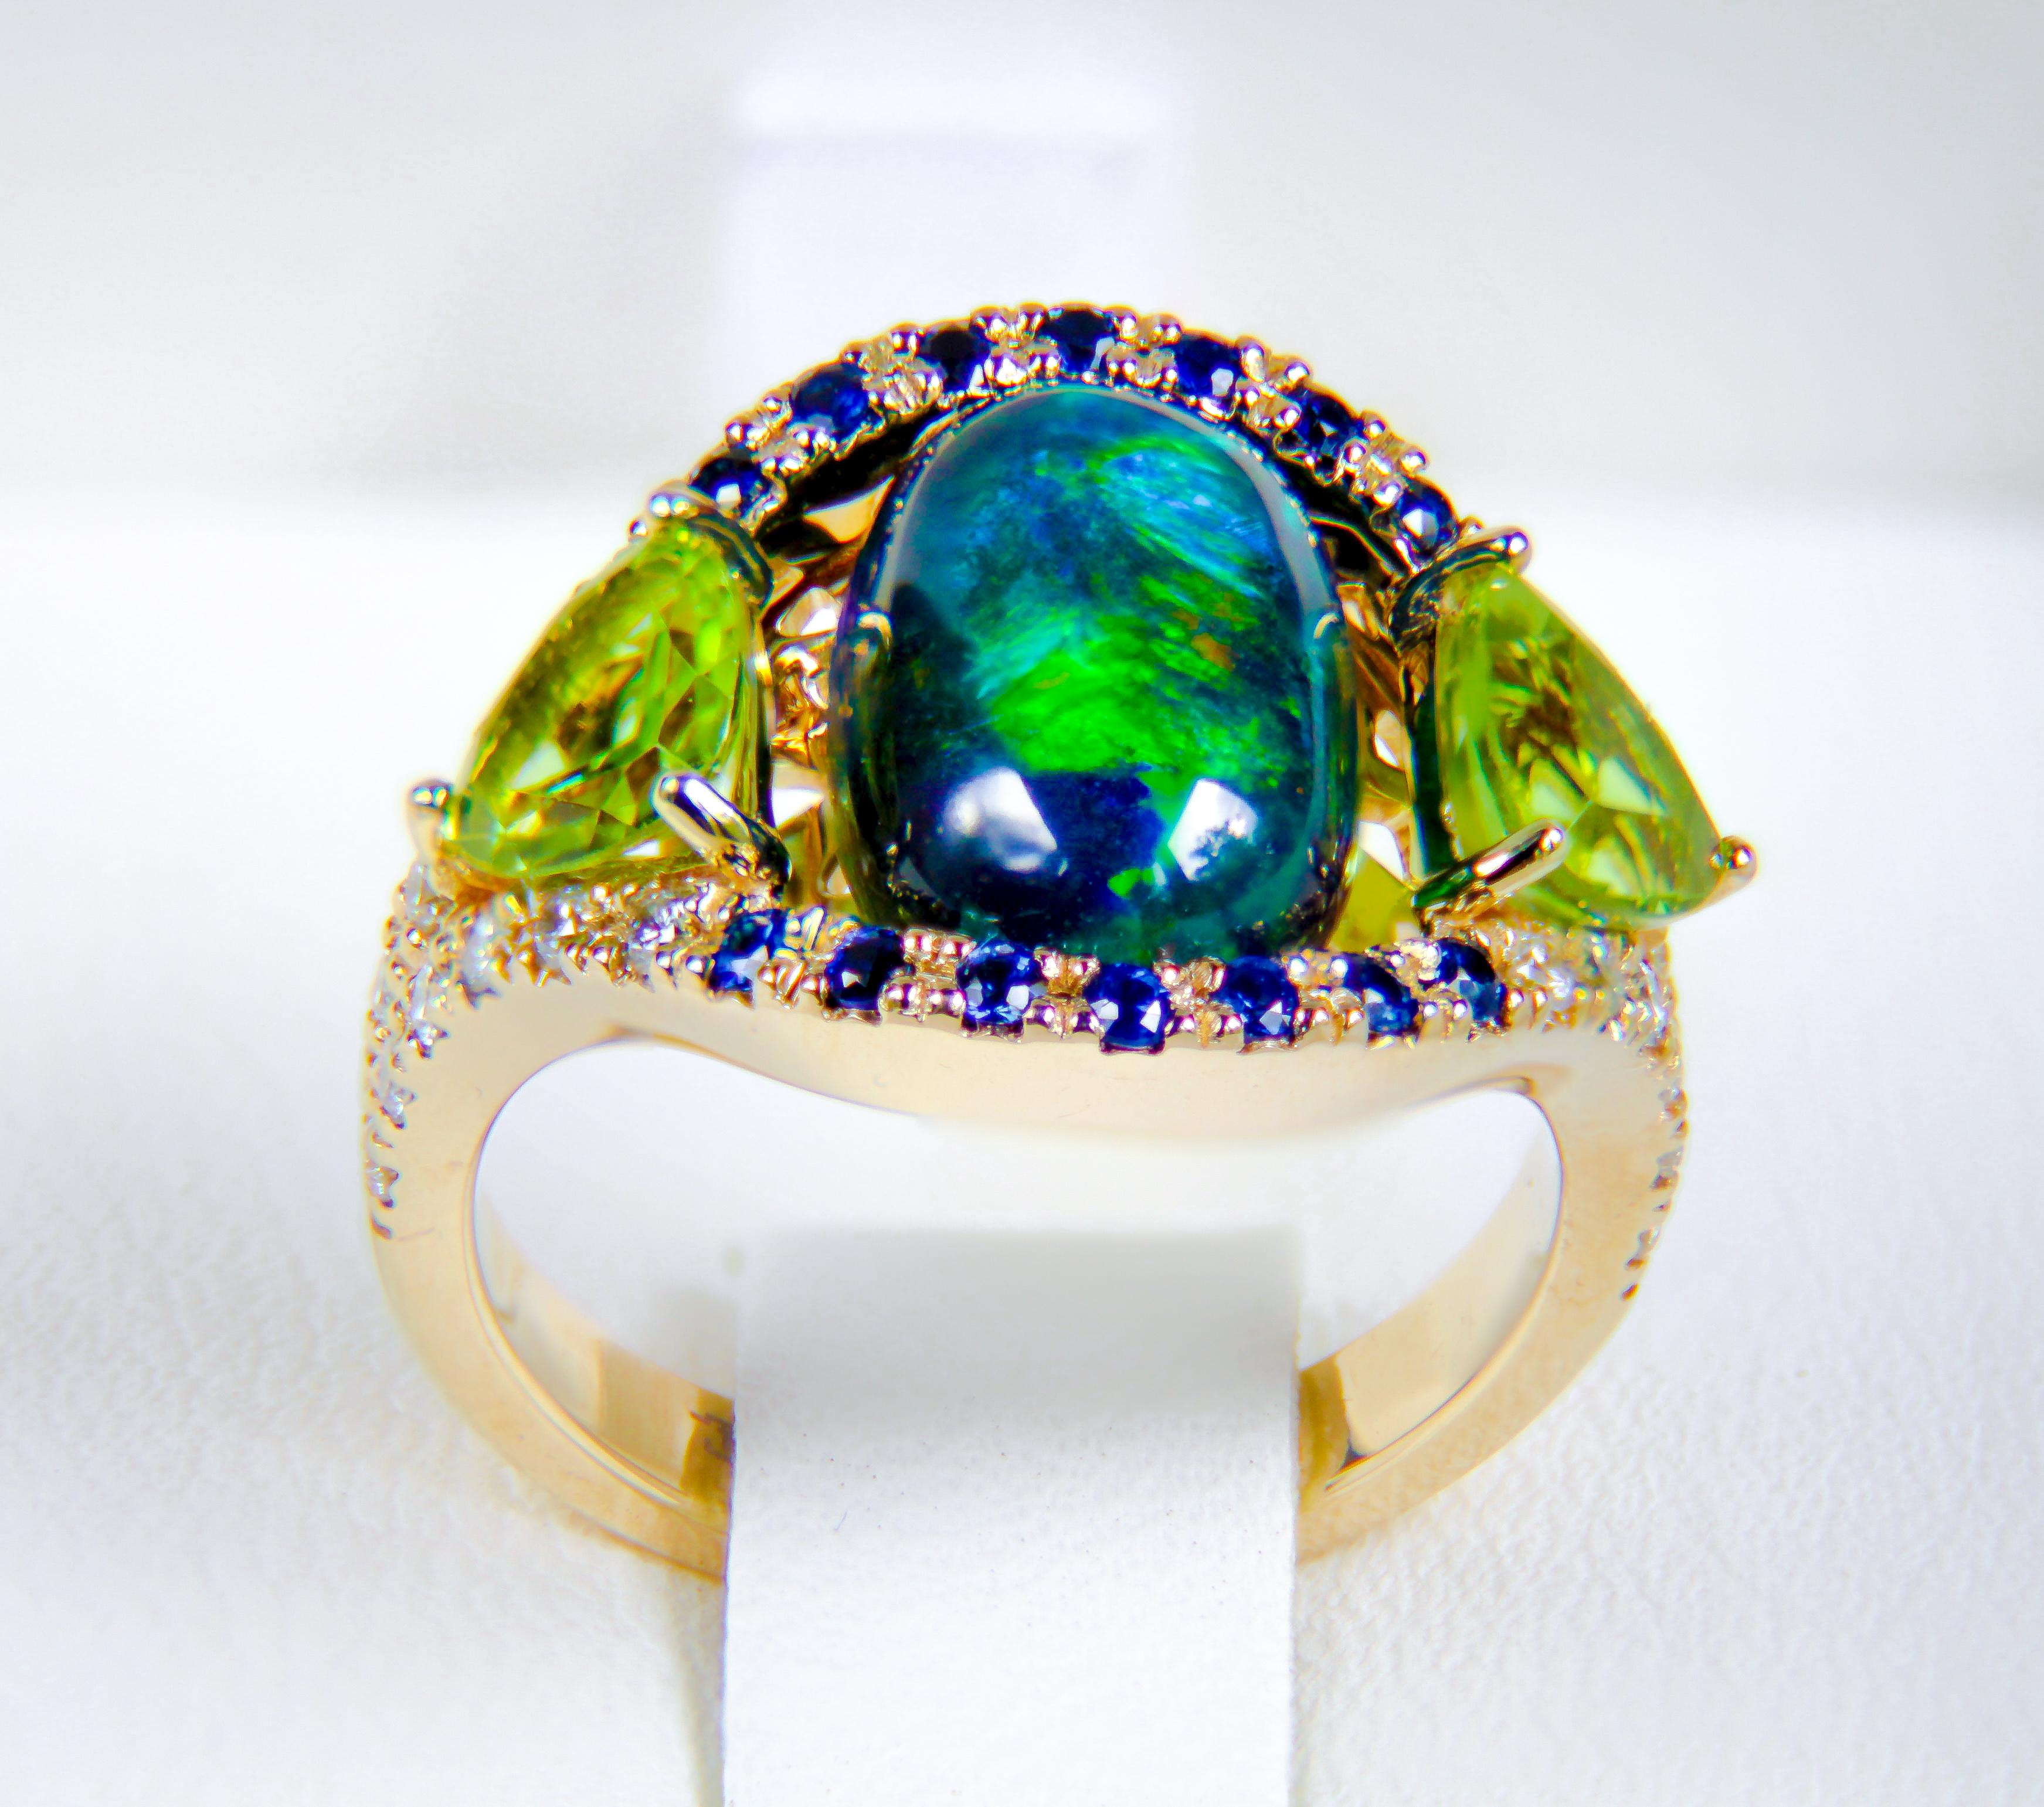 For Sale:  Black Opal, Sapphires, Peridots, Diamonds 14k Gold Ring, Genuine Opal Ring 2